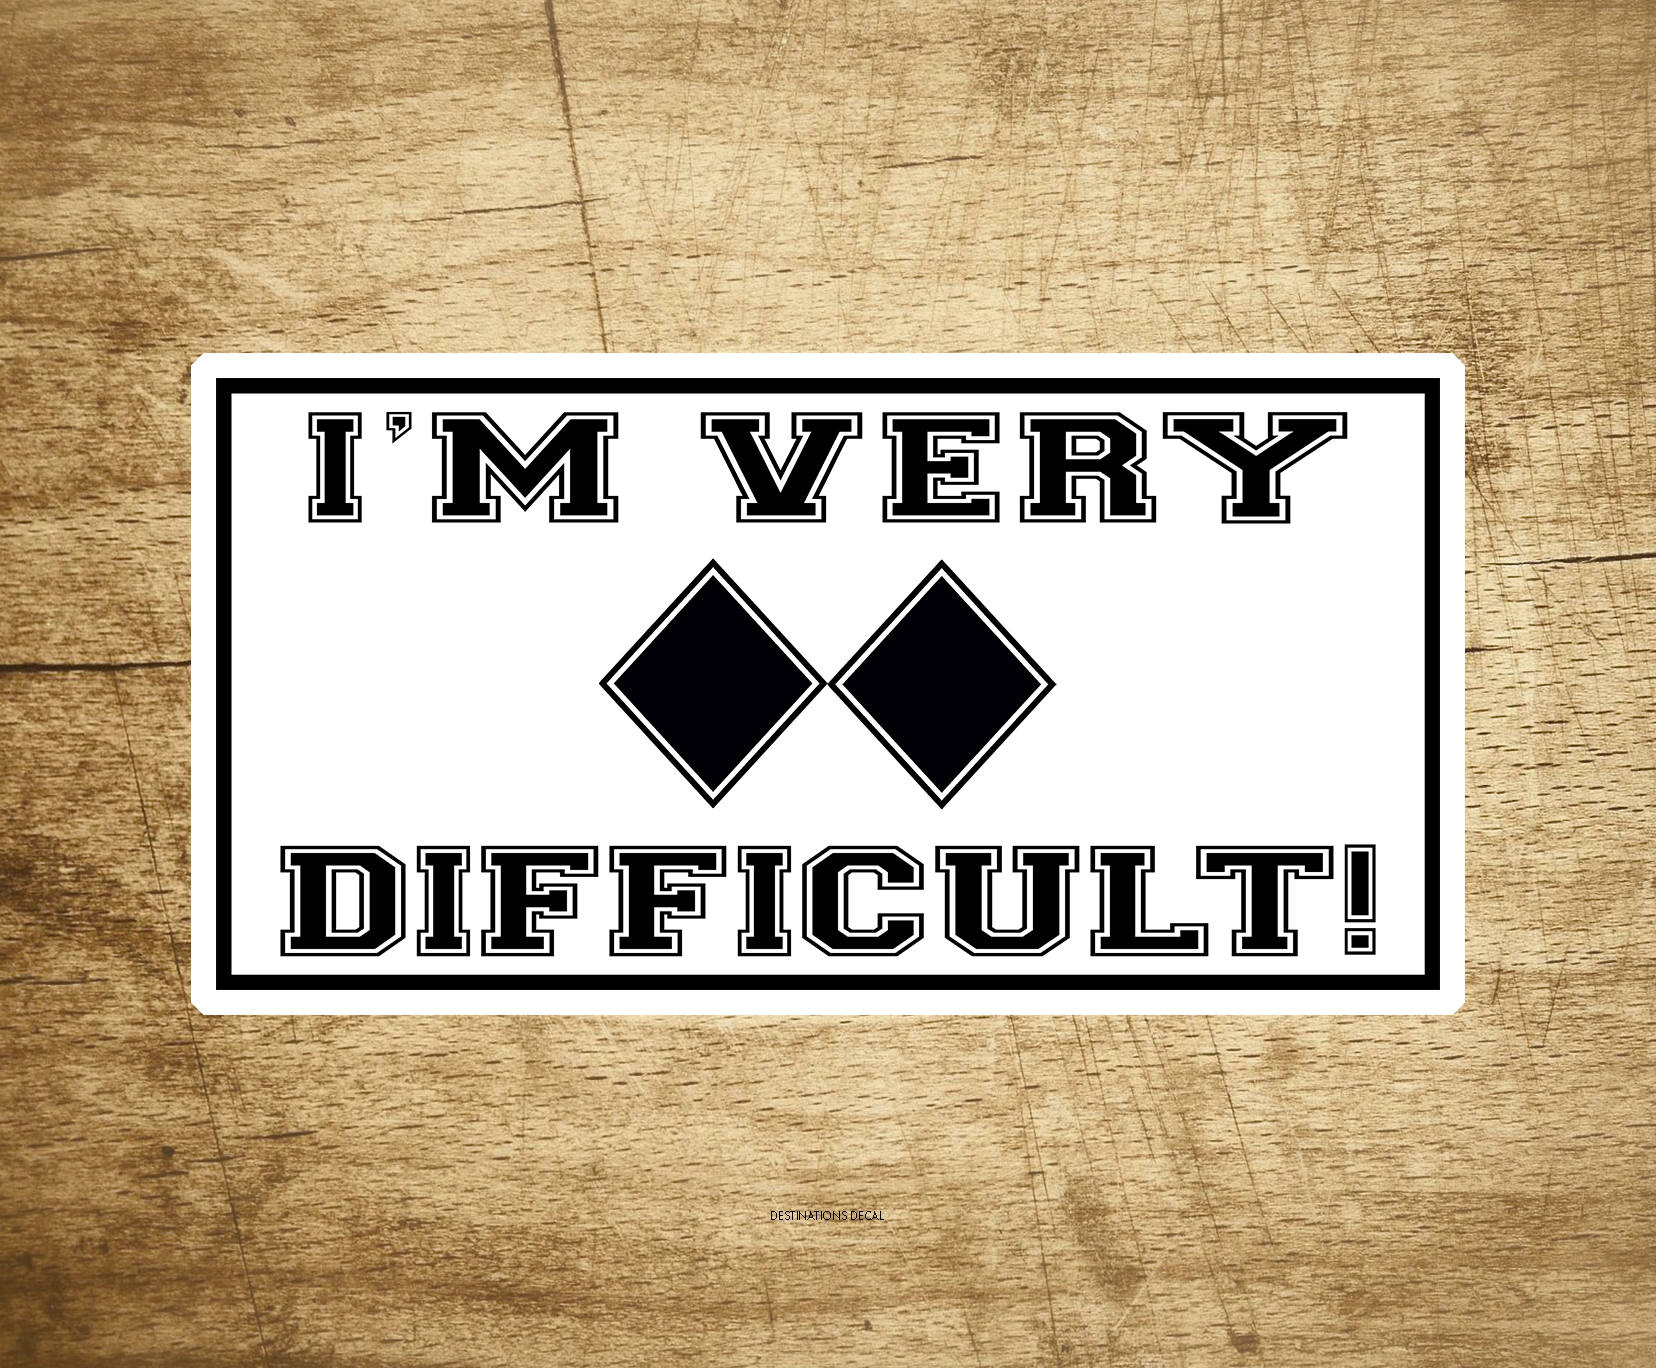 Skiing I'm Very Difficult Decal Sticker 4" x 2" Double Black Diamond